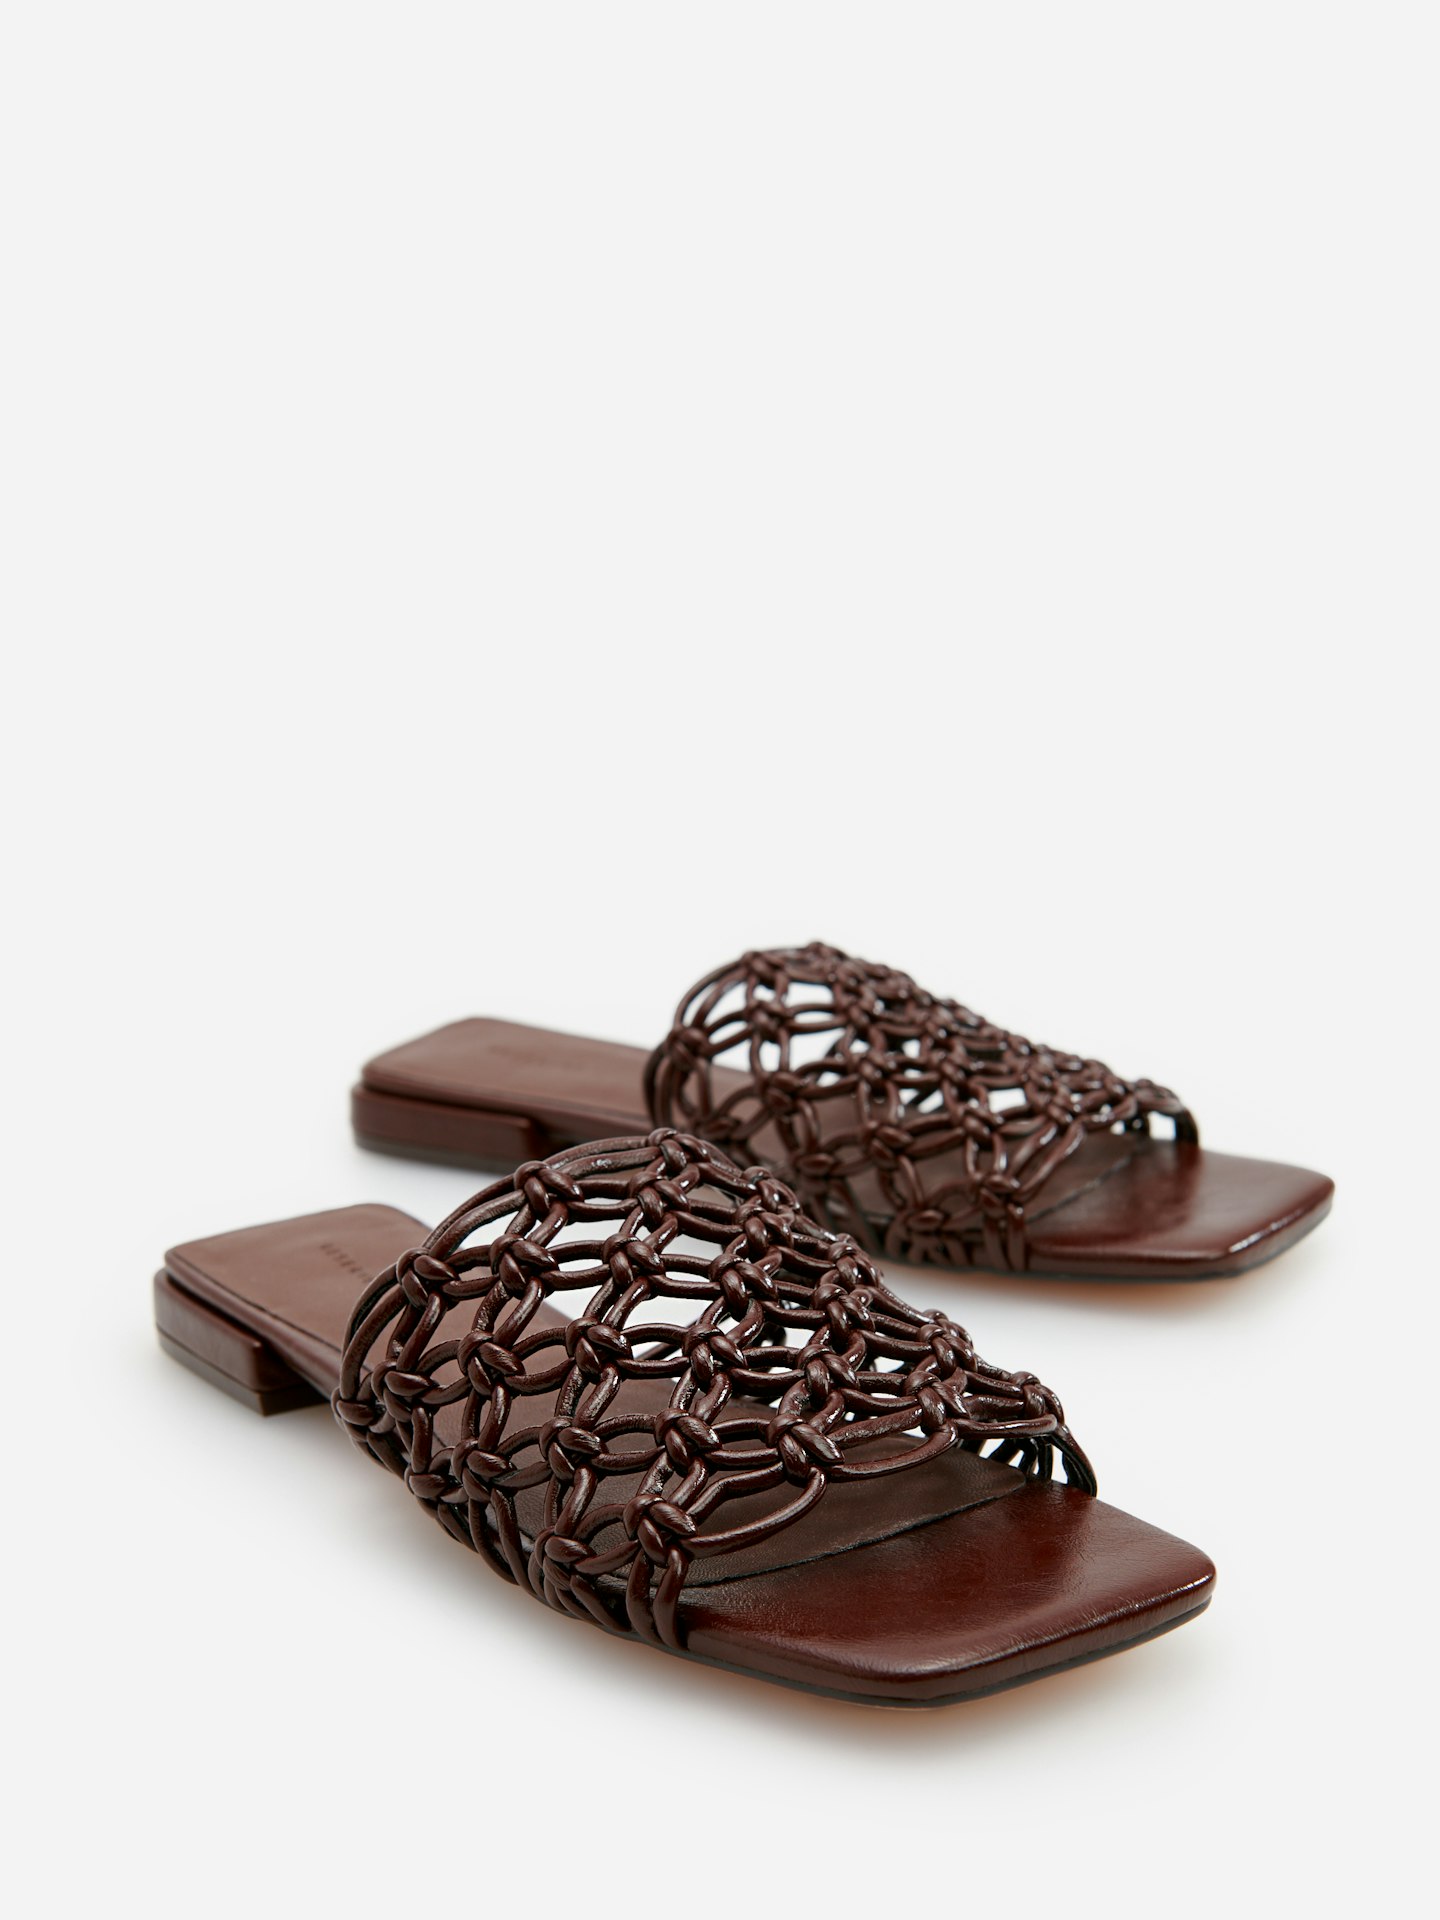 River Island, Sliders With Woven Vamp, WAS £35.99 NOW £25.99